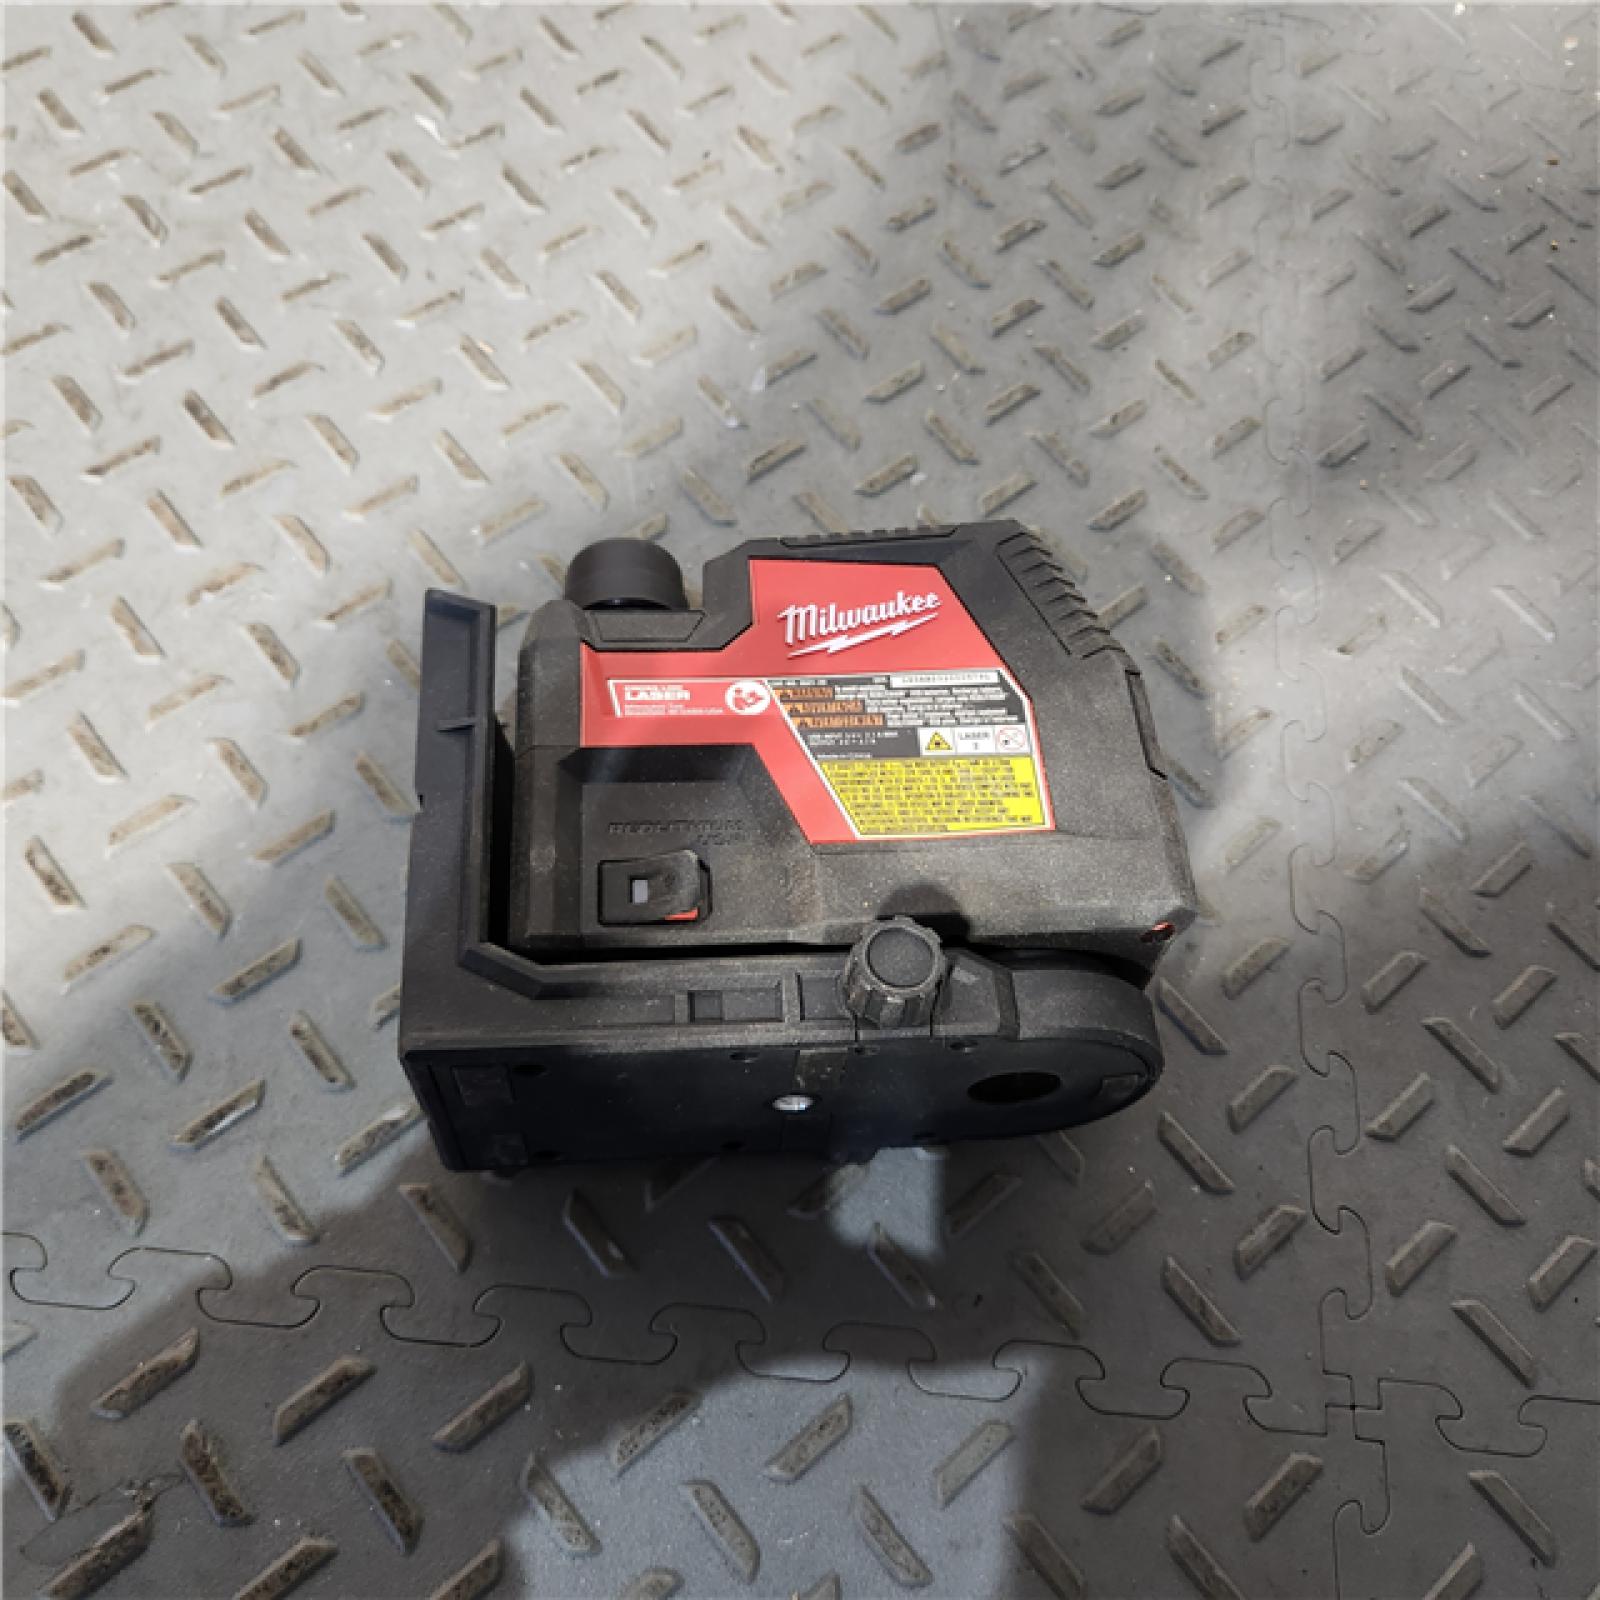 HOUSTON Location-AS-IS-Milwaukee 3521-21 4V Lithium-Ion Cordless USB Rechargeable Green Beam Cross Line Laser APPEARS IN LIKE NEW Condition